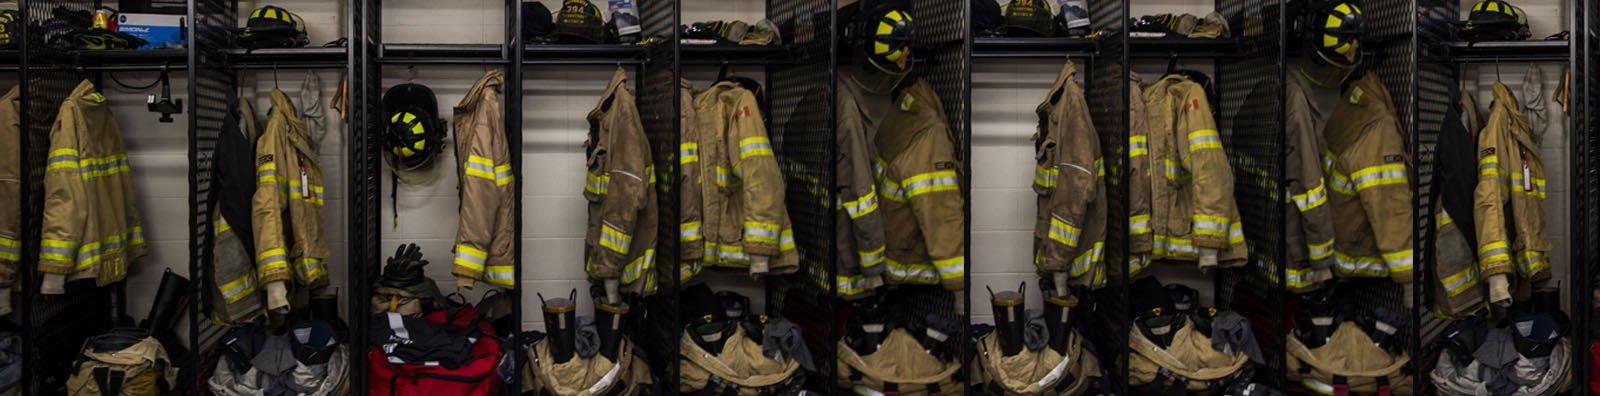 firefighter gear hanging up